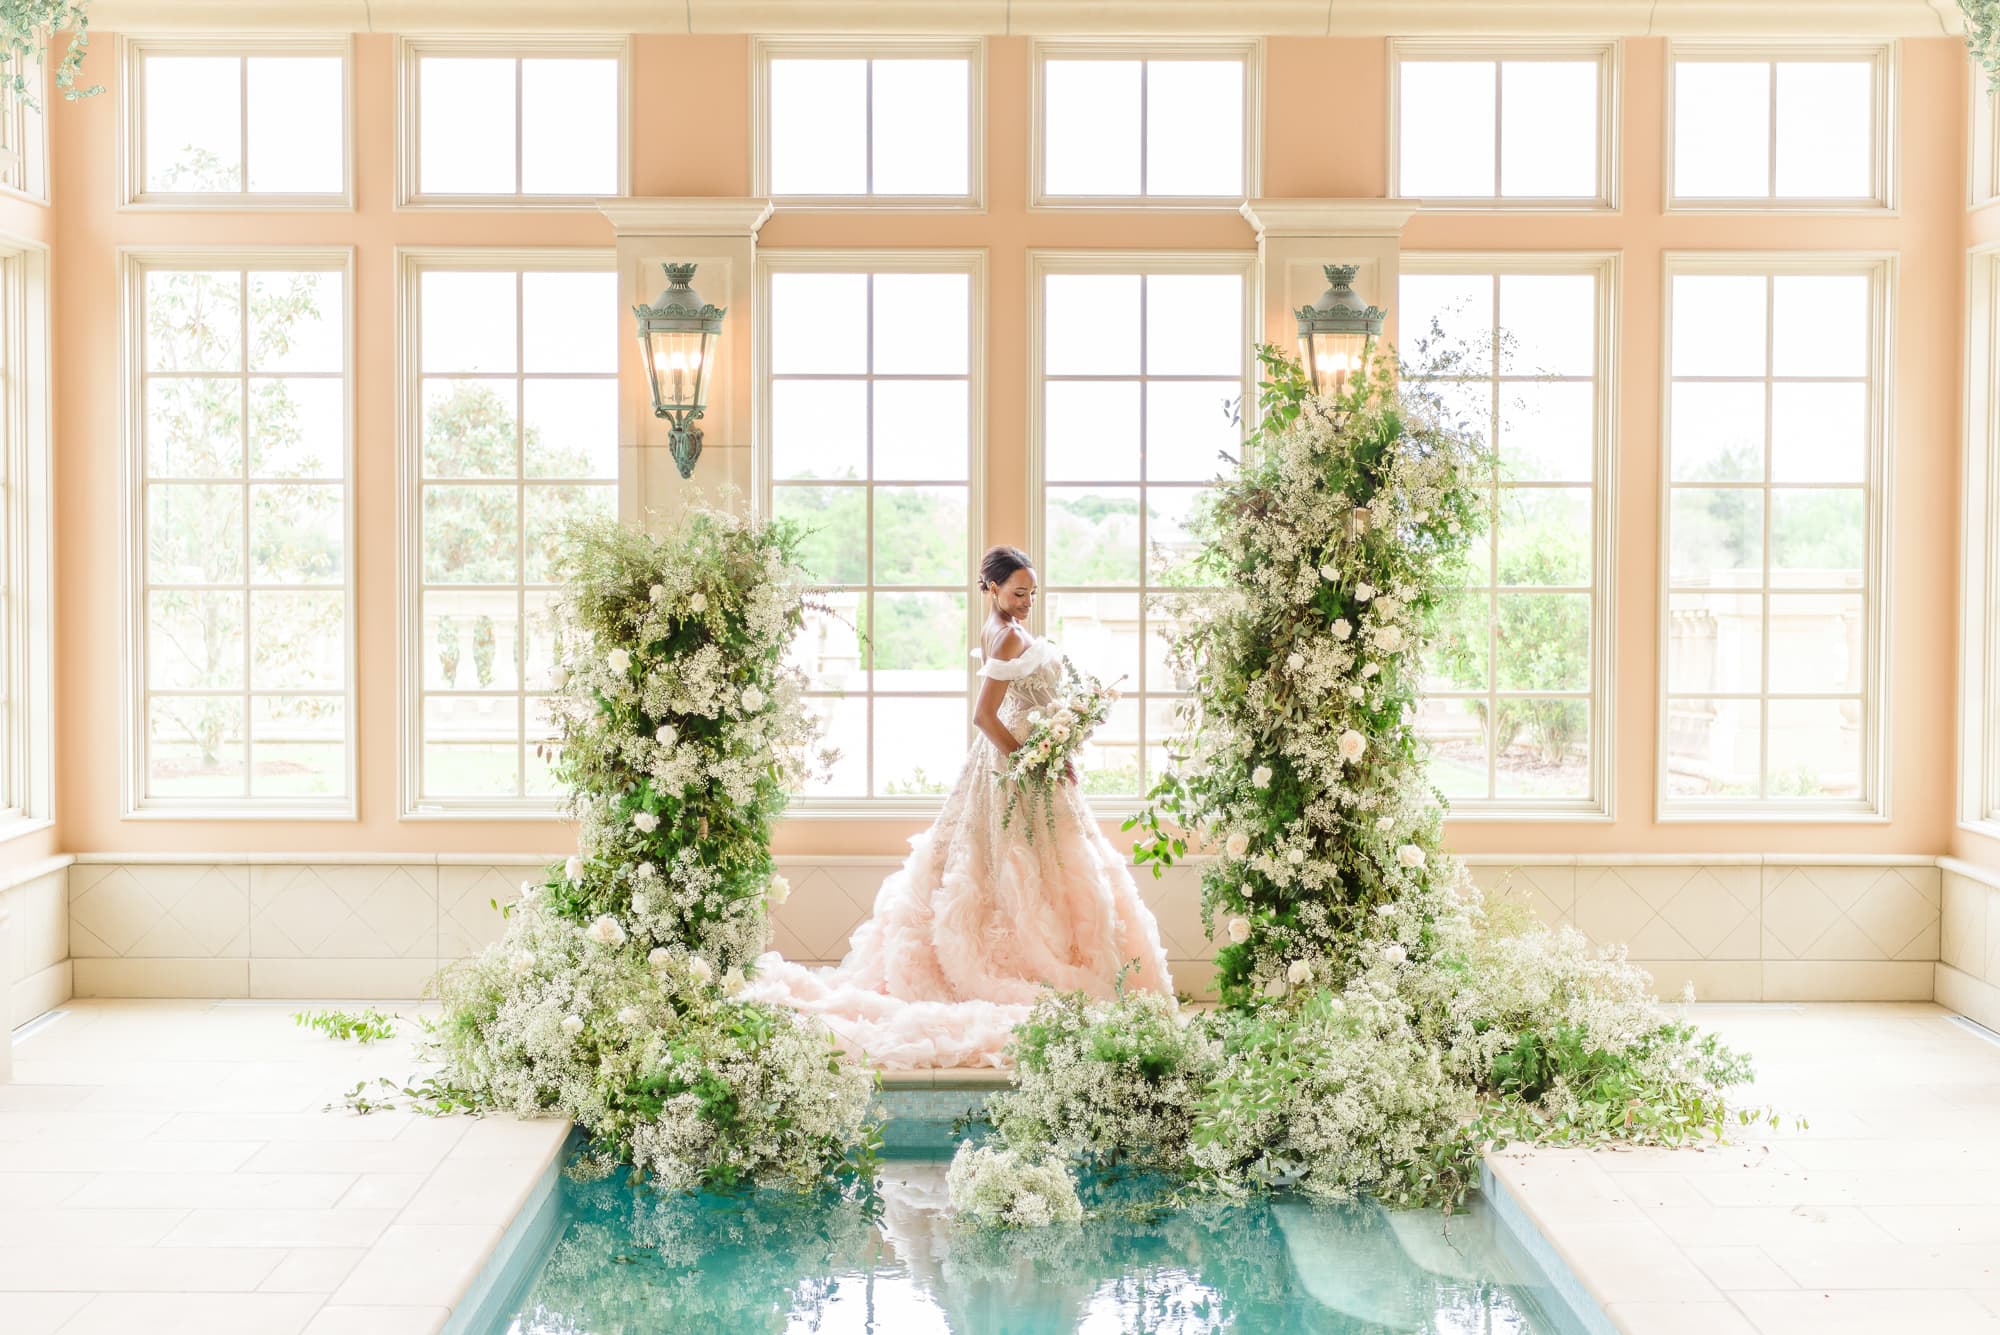 This poolside picture idea has an archway of flowers at the edge of the pool.